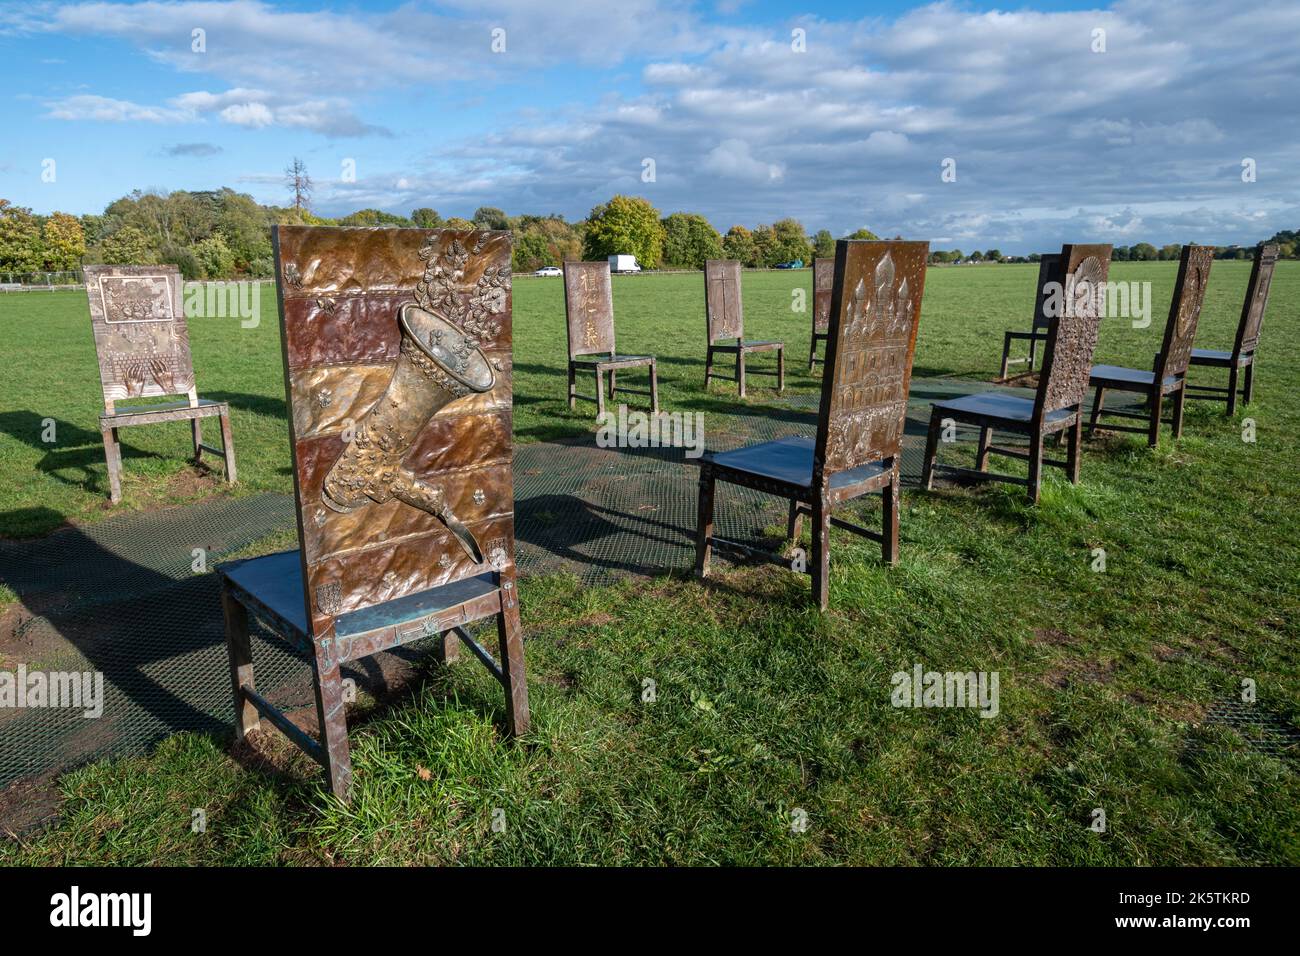 The Jurors artwork by artist Hew Locke on Runnymede meadows, Surrey, England, UK, to mark the 800th anniversary of the sealing of the magna carta Stock Photo